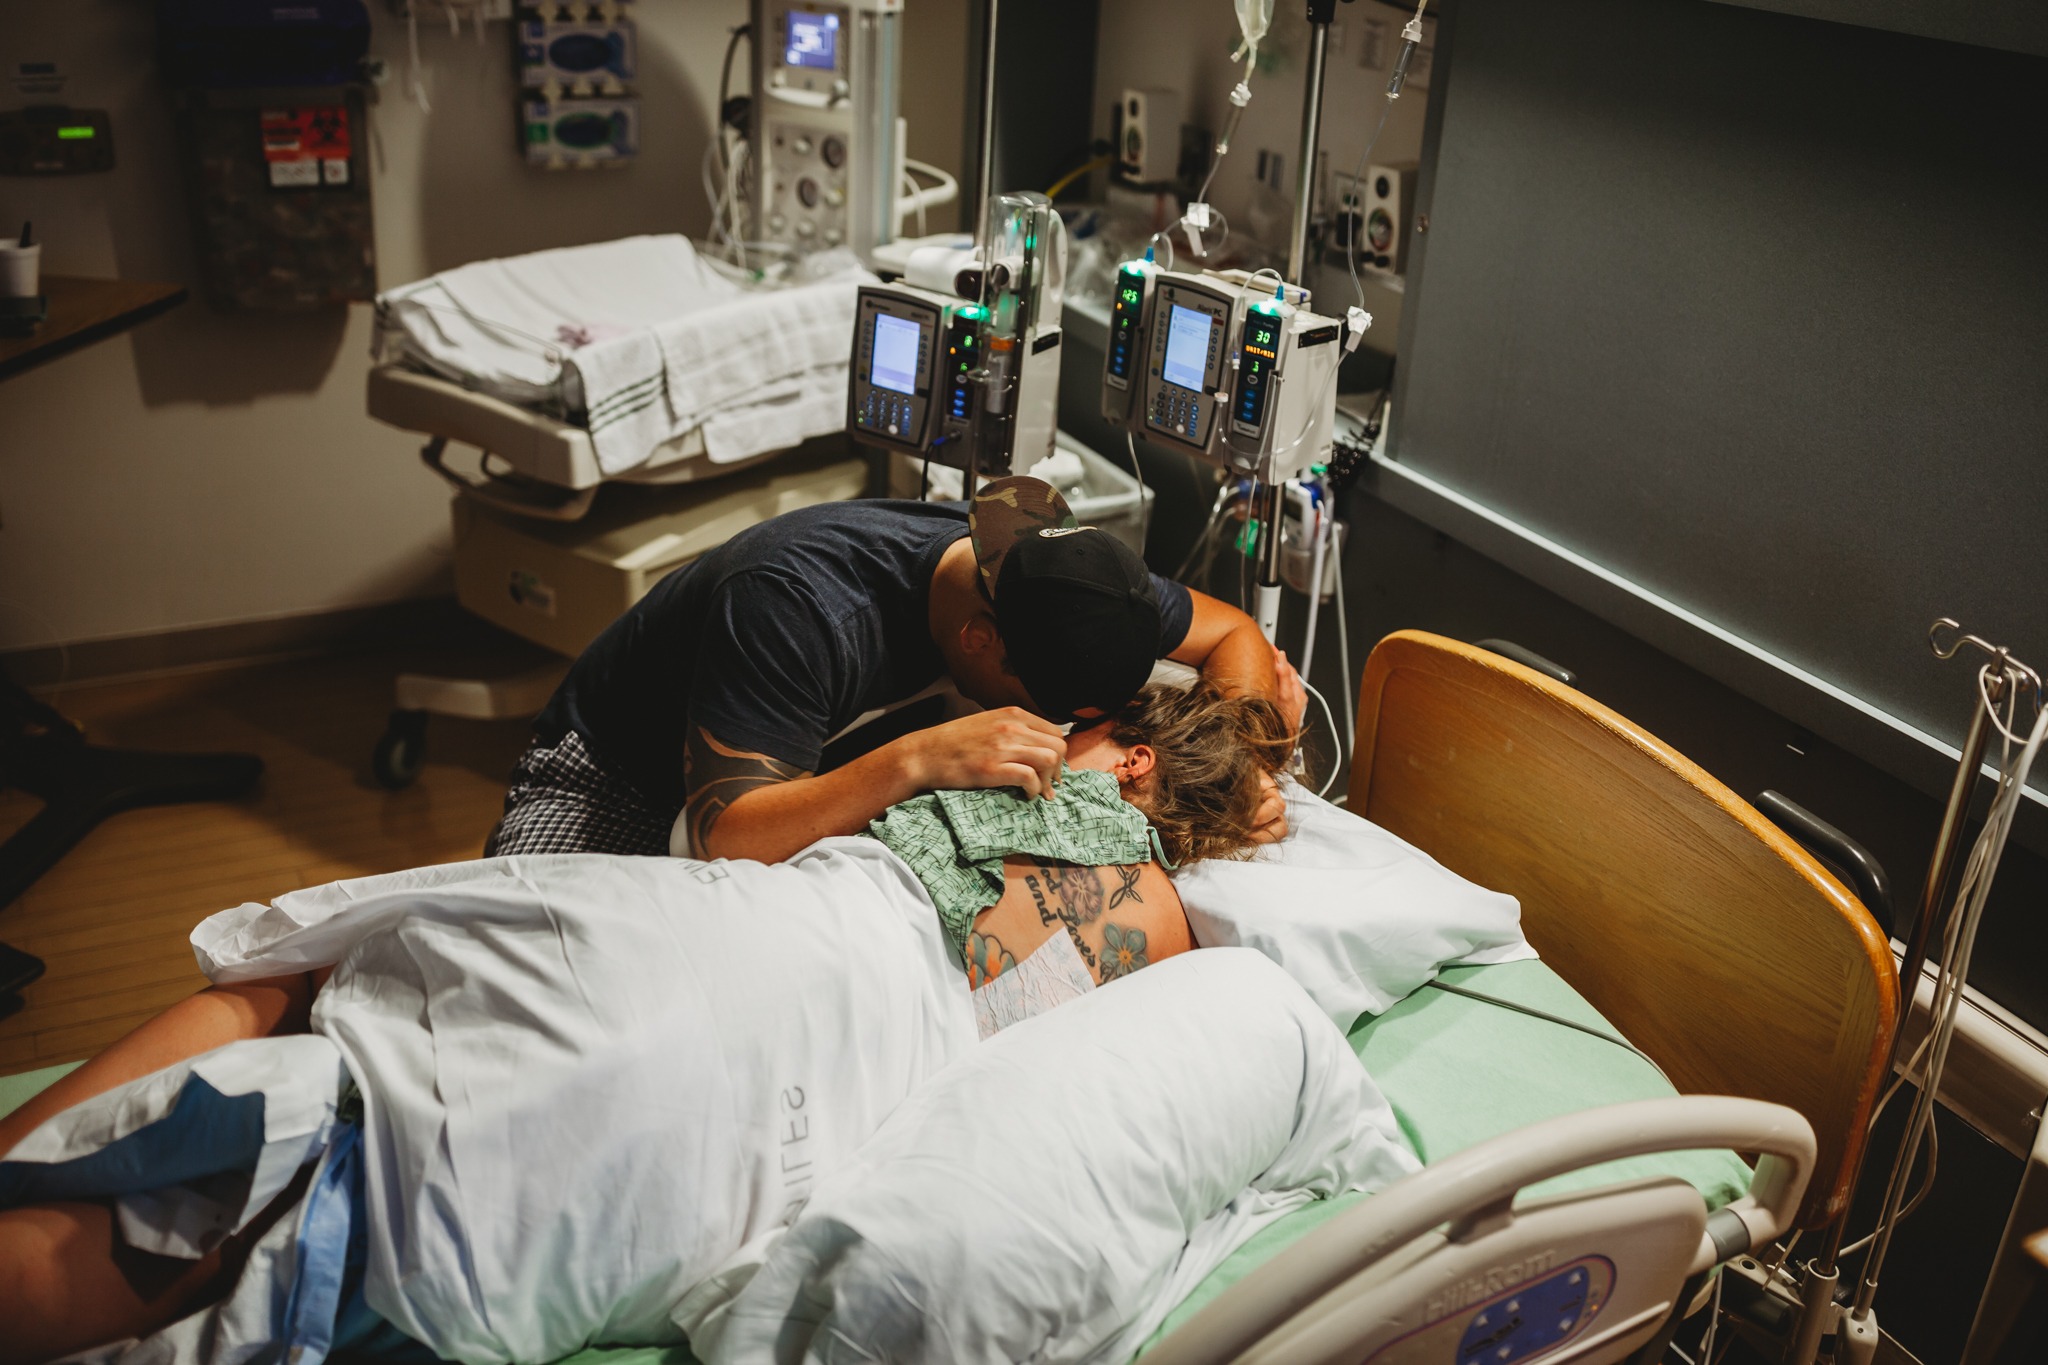 Partner supports woman during labor and birth at a Los Angeles hospital.